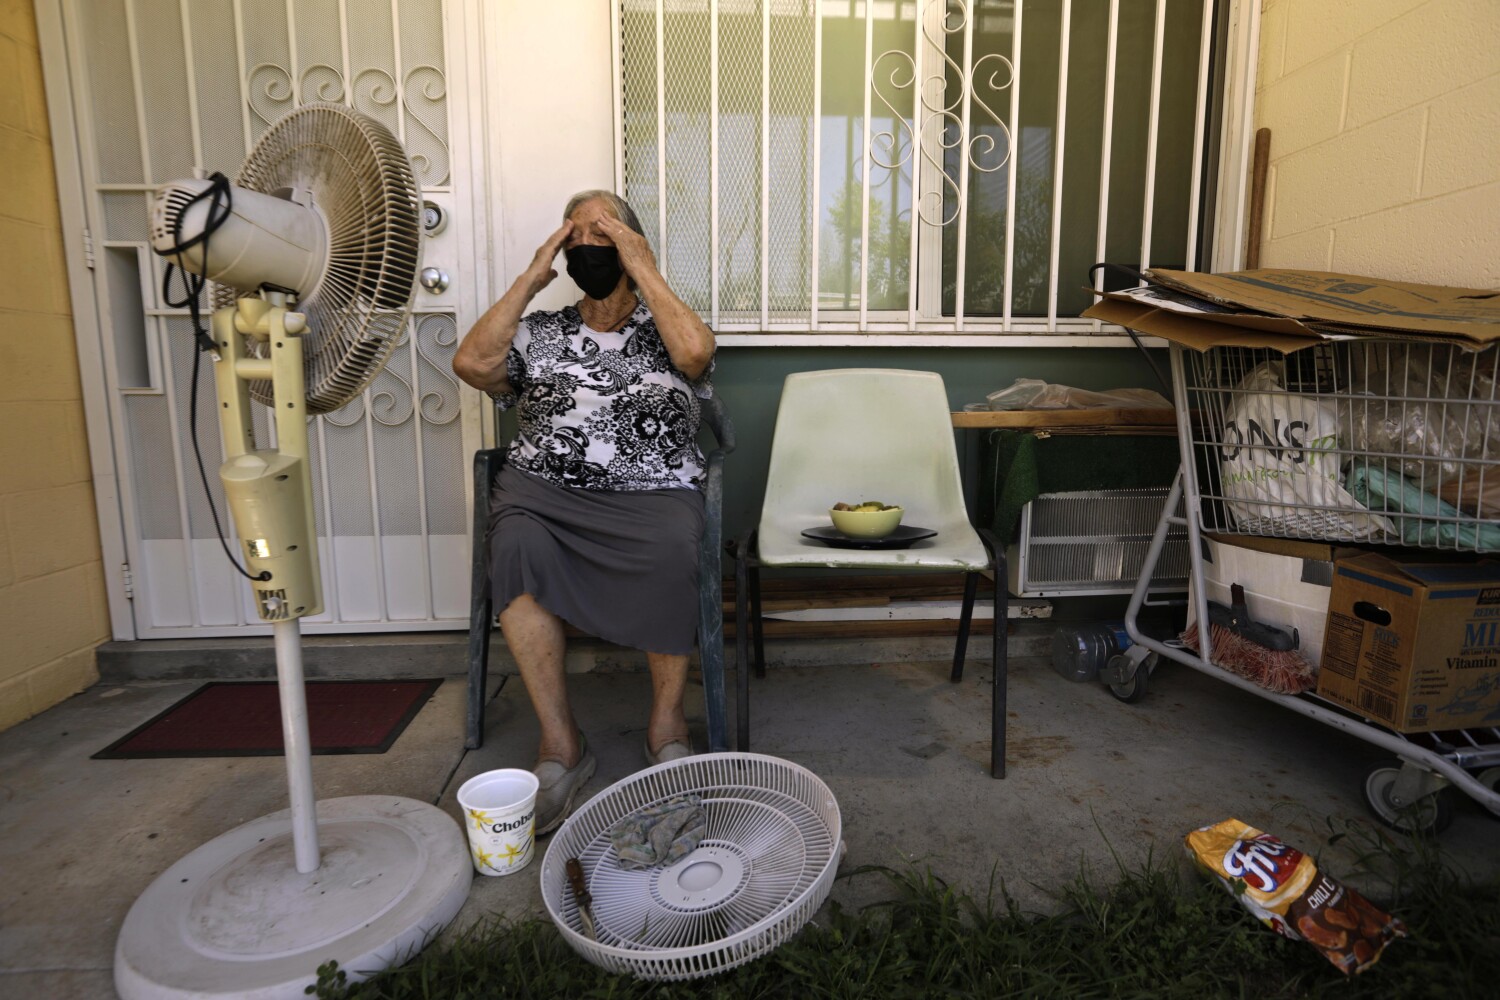 California promises to do better on heat waves, but can it?